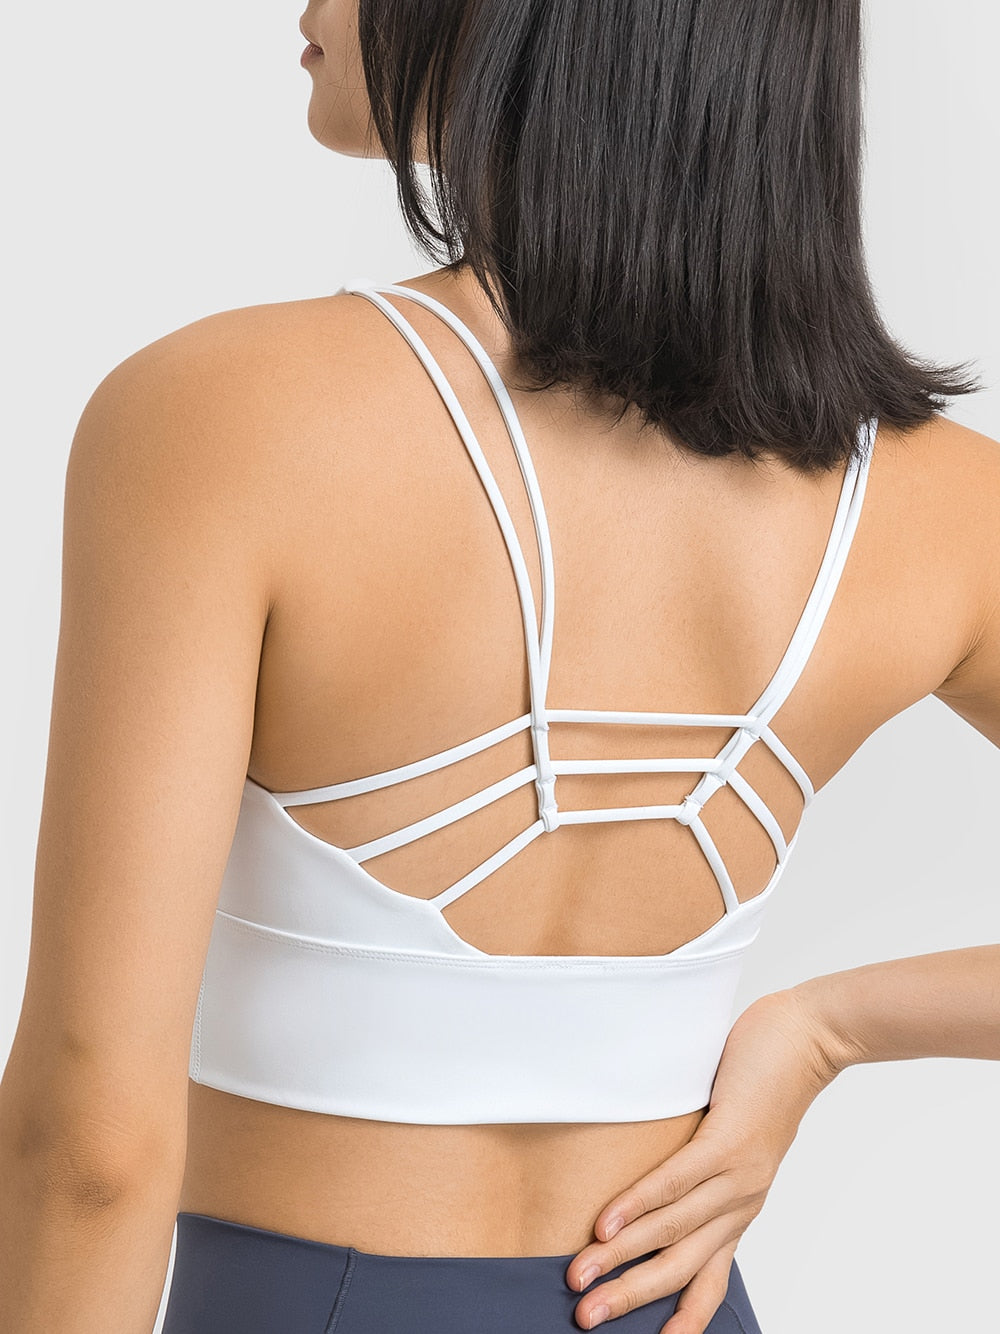 Nepoagym Women Strappy Sports Bra Medium Support Padded Workout Bras  Buttery Soft V Back White Bra for Gym Fitness Running – Nepoagym Official  Store